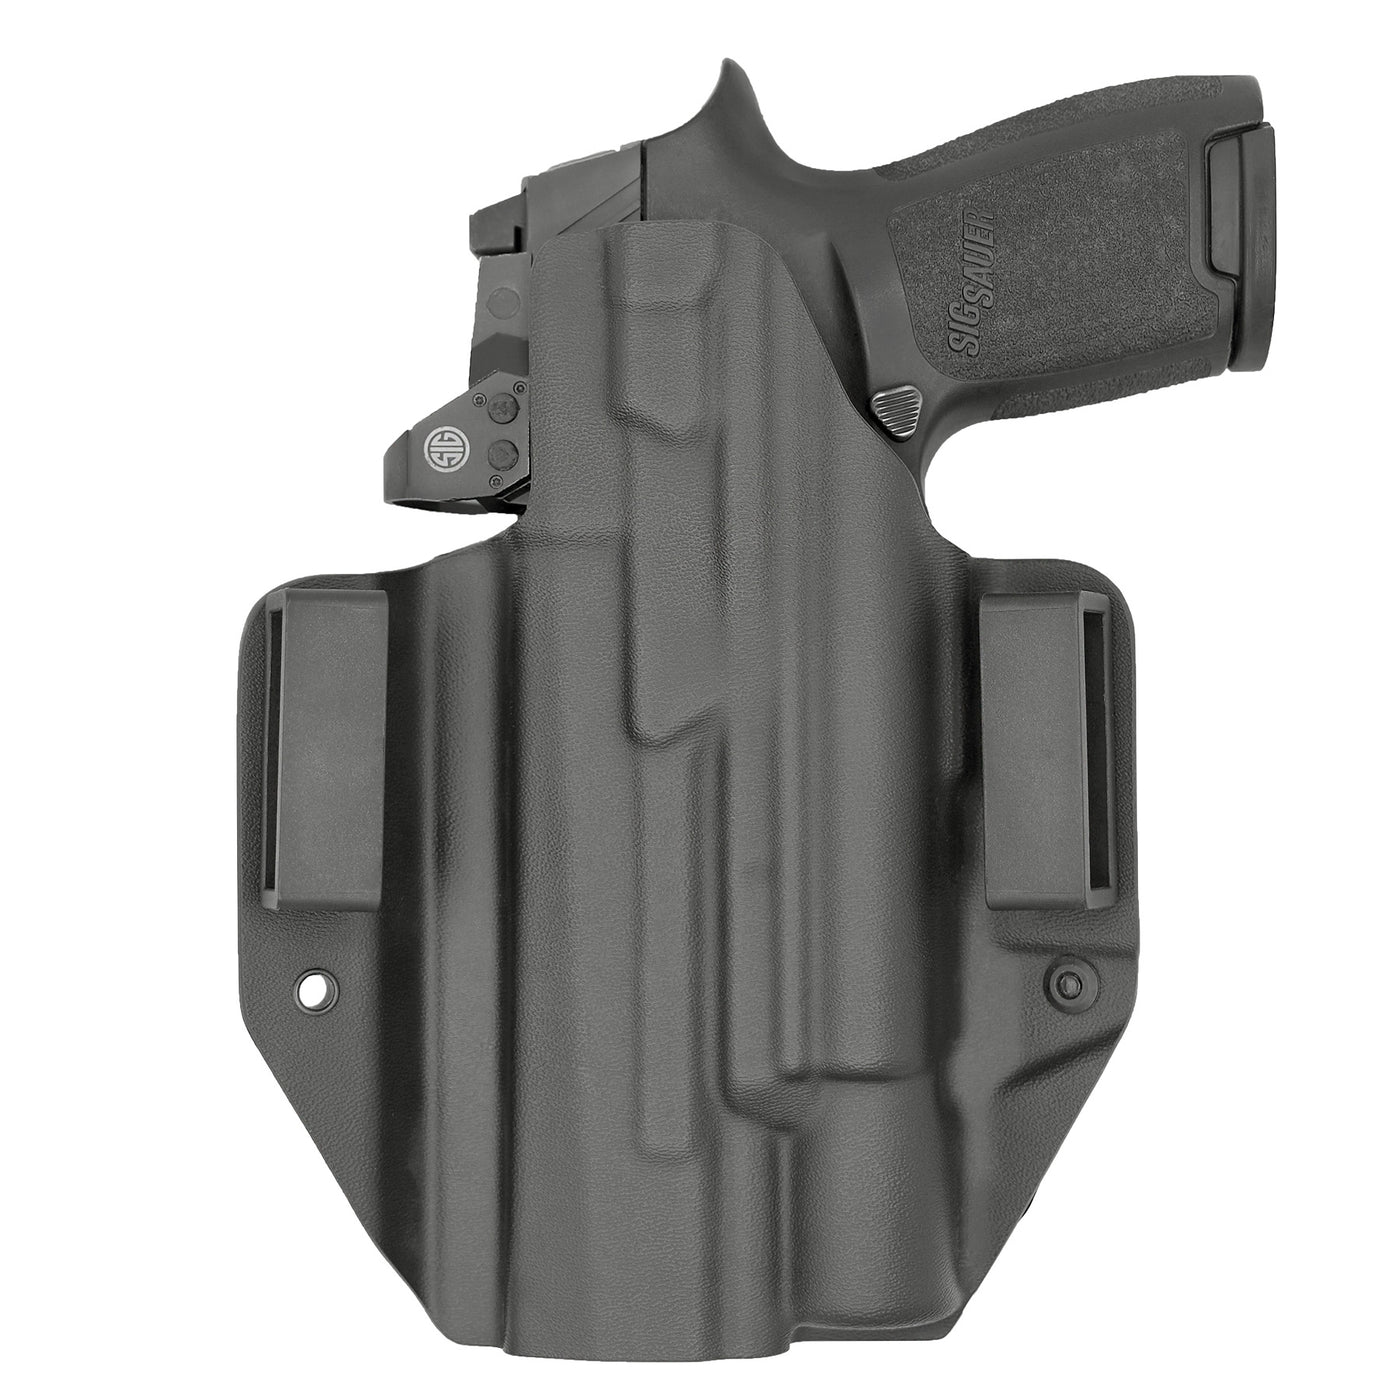 C&G Holsters custom OWB Tactical Sig P320/c Surefire X300 in holstered position back view